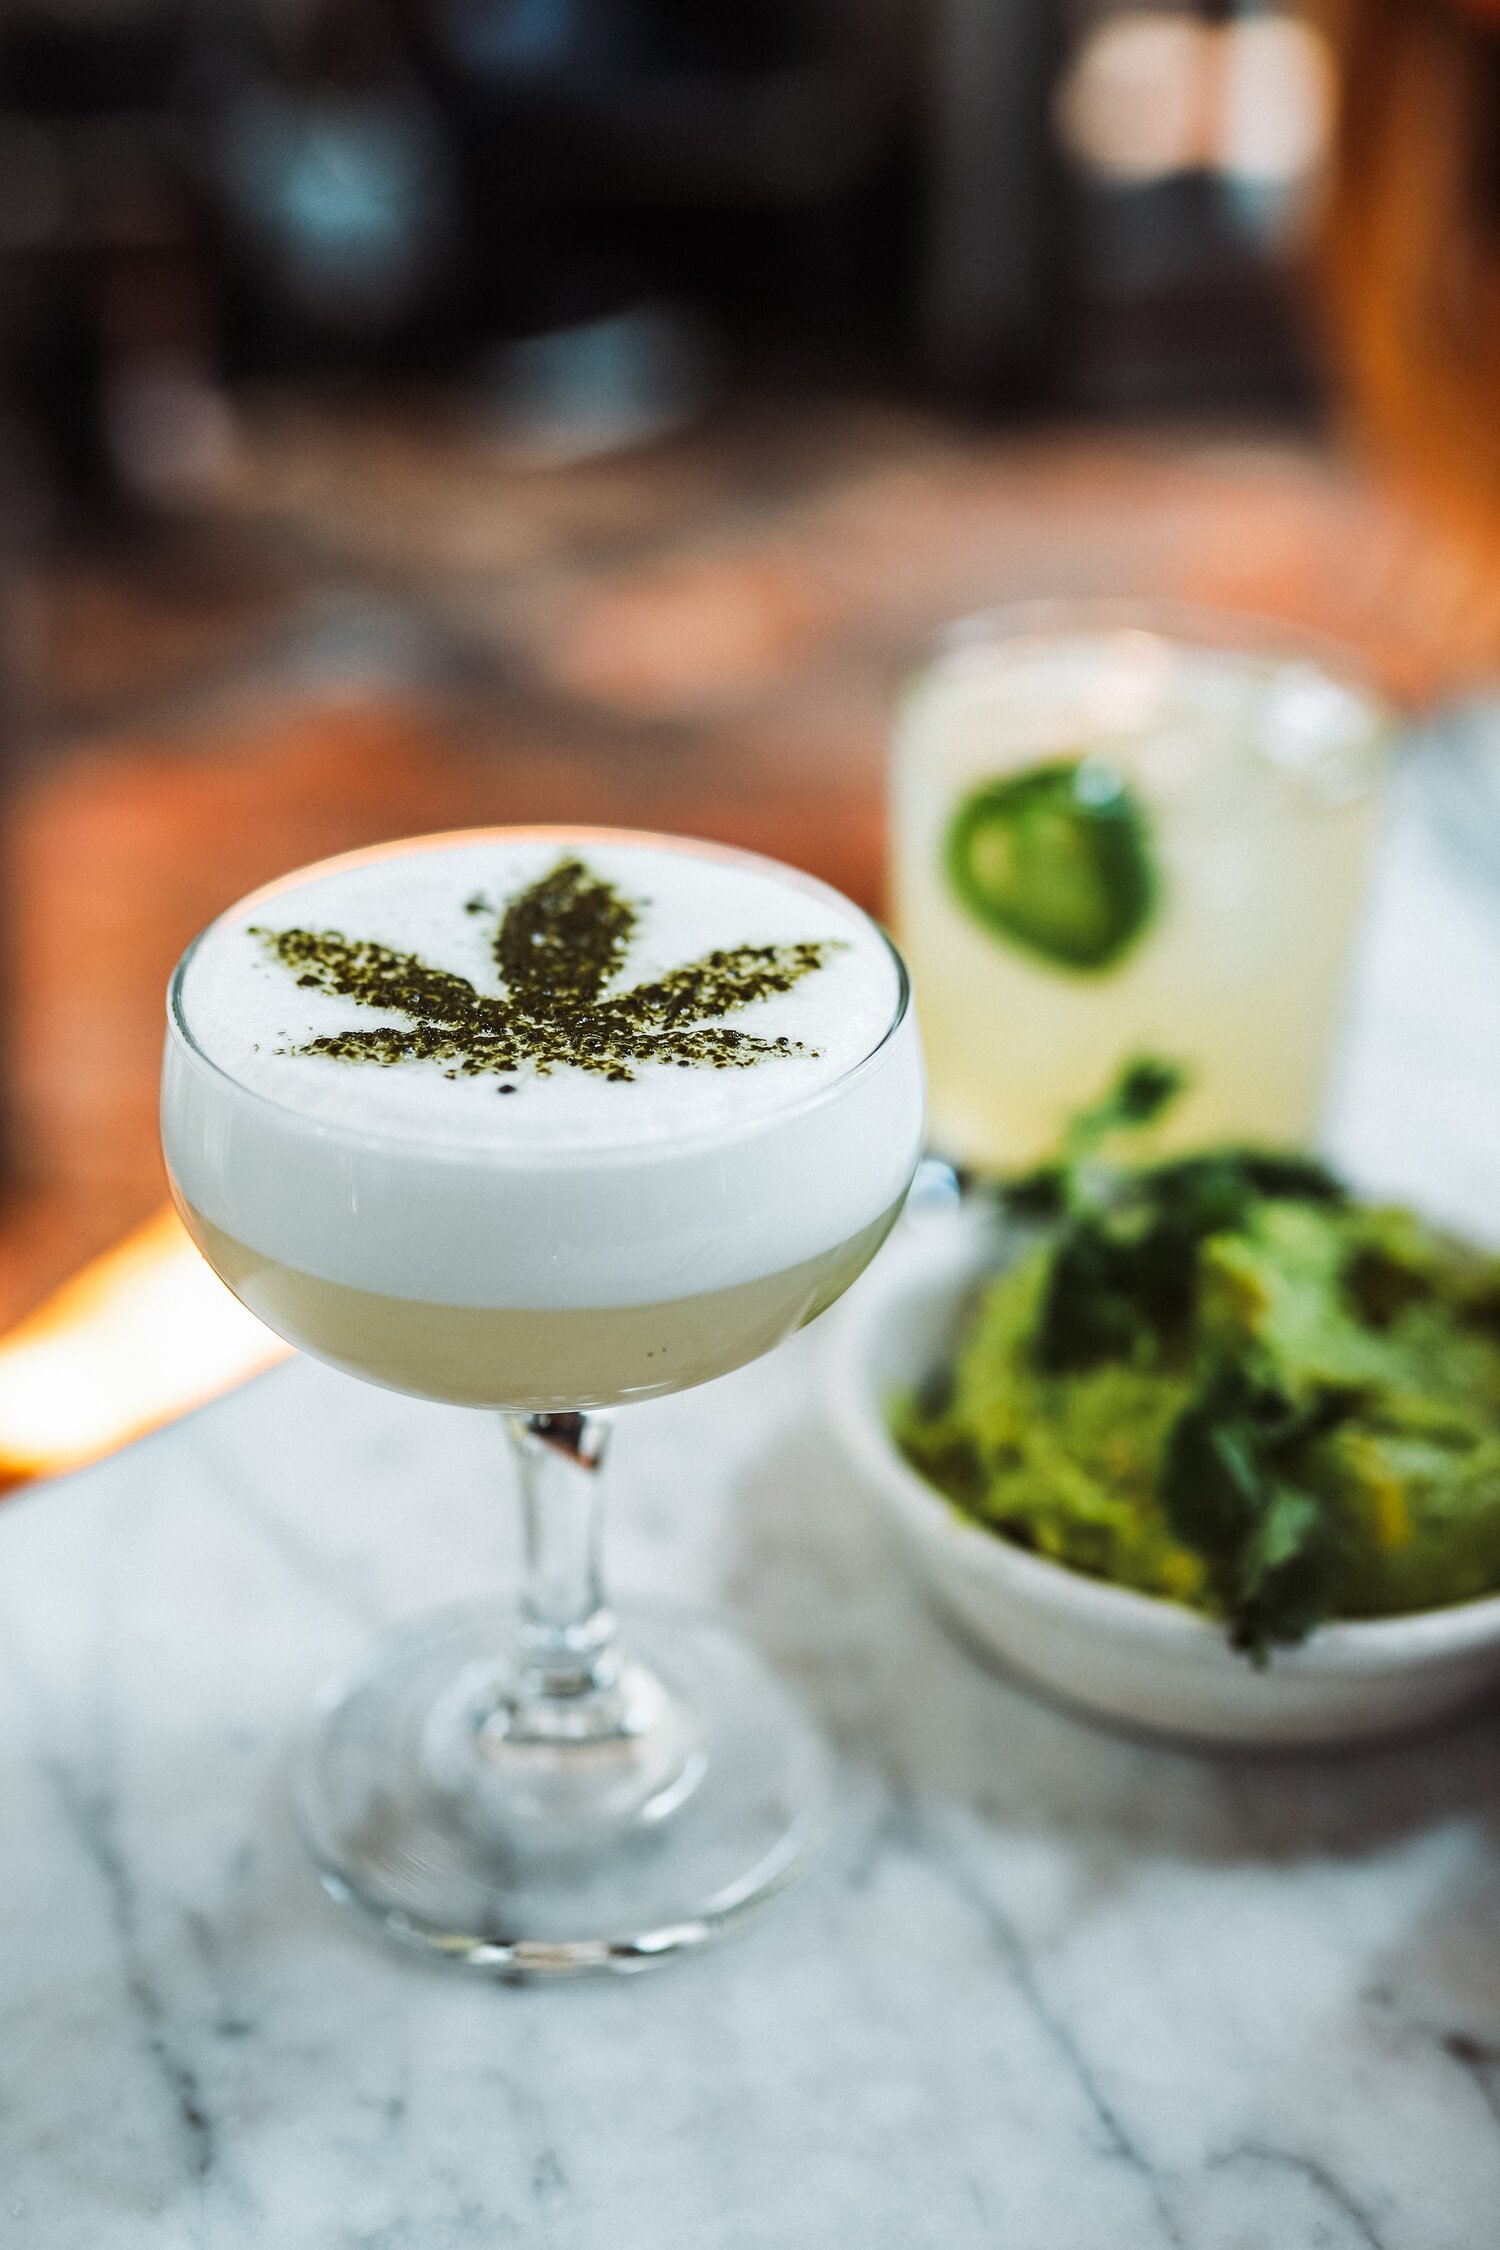 Cannabis Hospitality: Enhancing the Tourism Experience